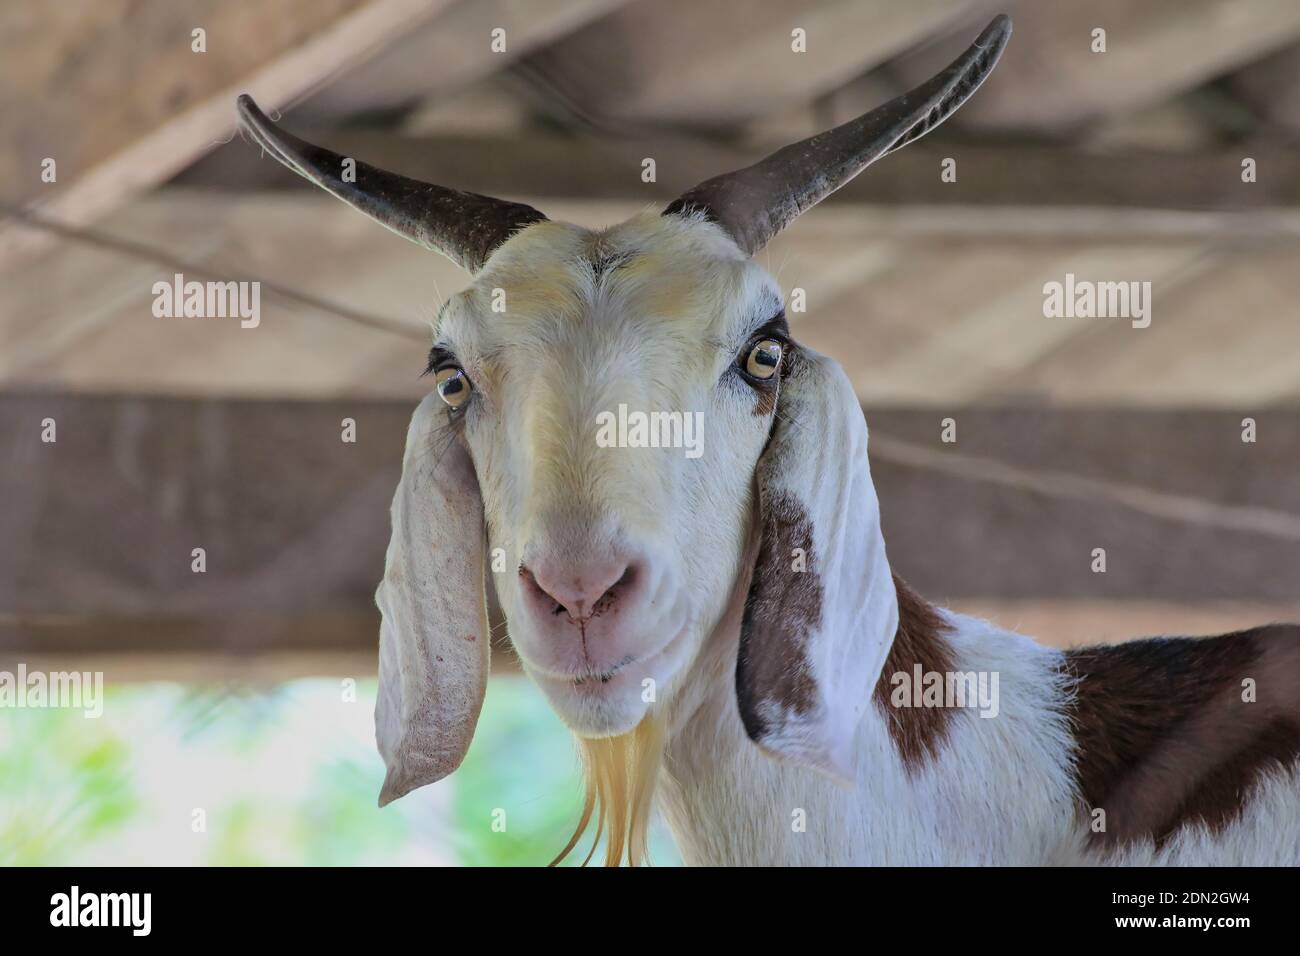 The long-horned goat turned its gaze with attention. Stock Photo